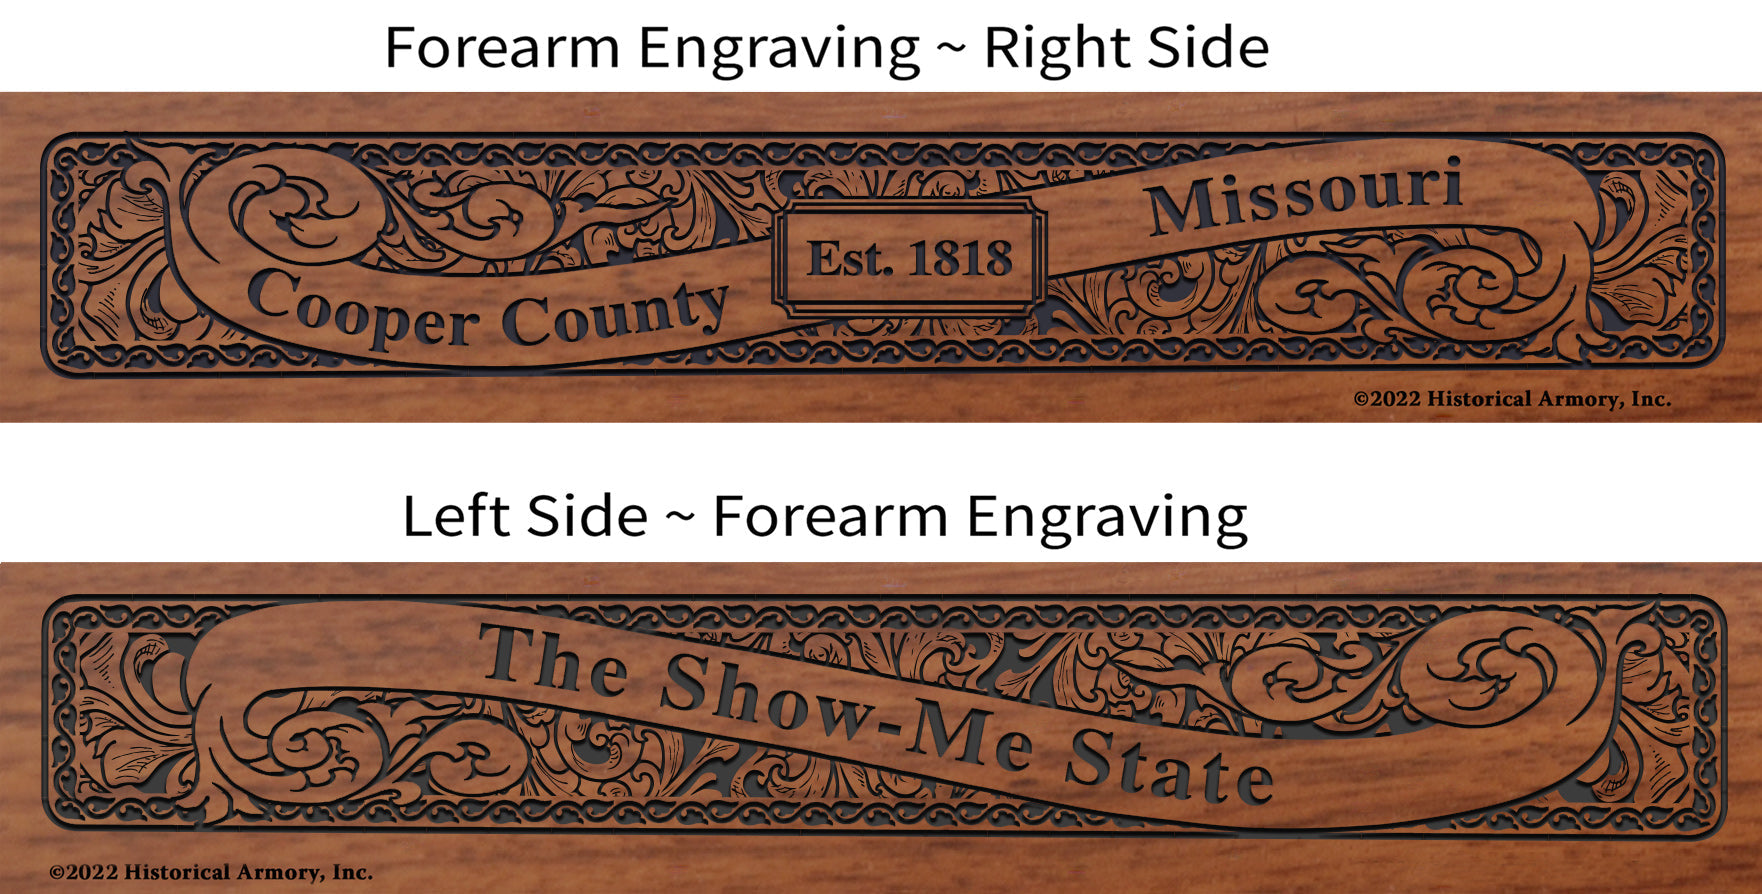 Cooper County Missouri Engraved Rifle Forearm